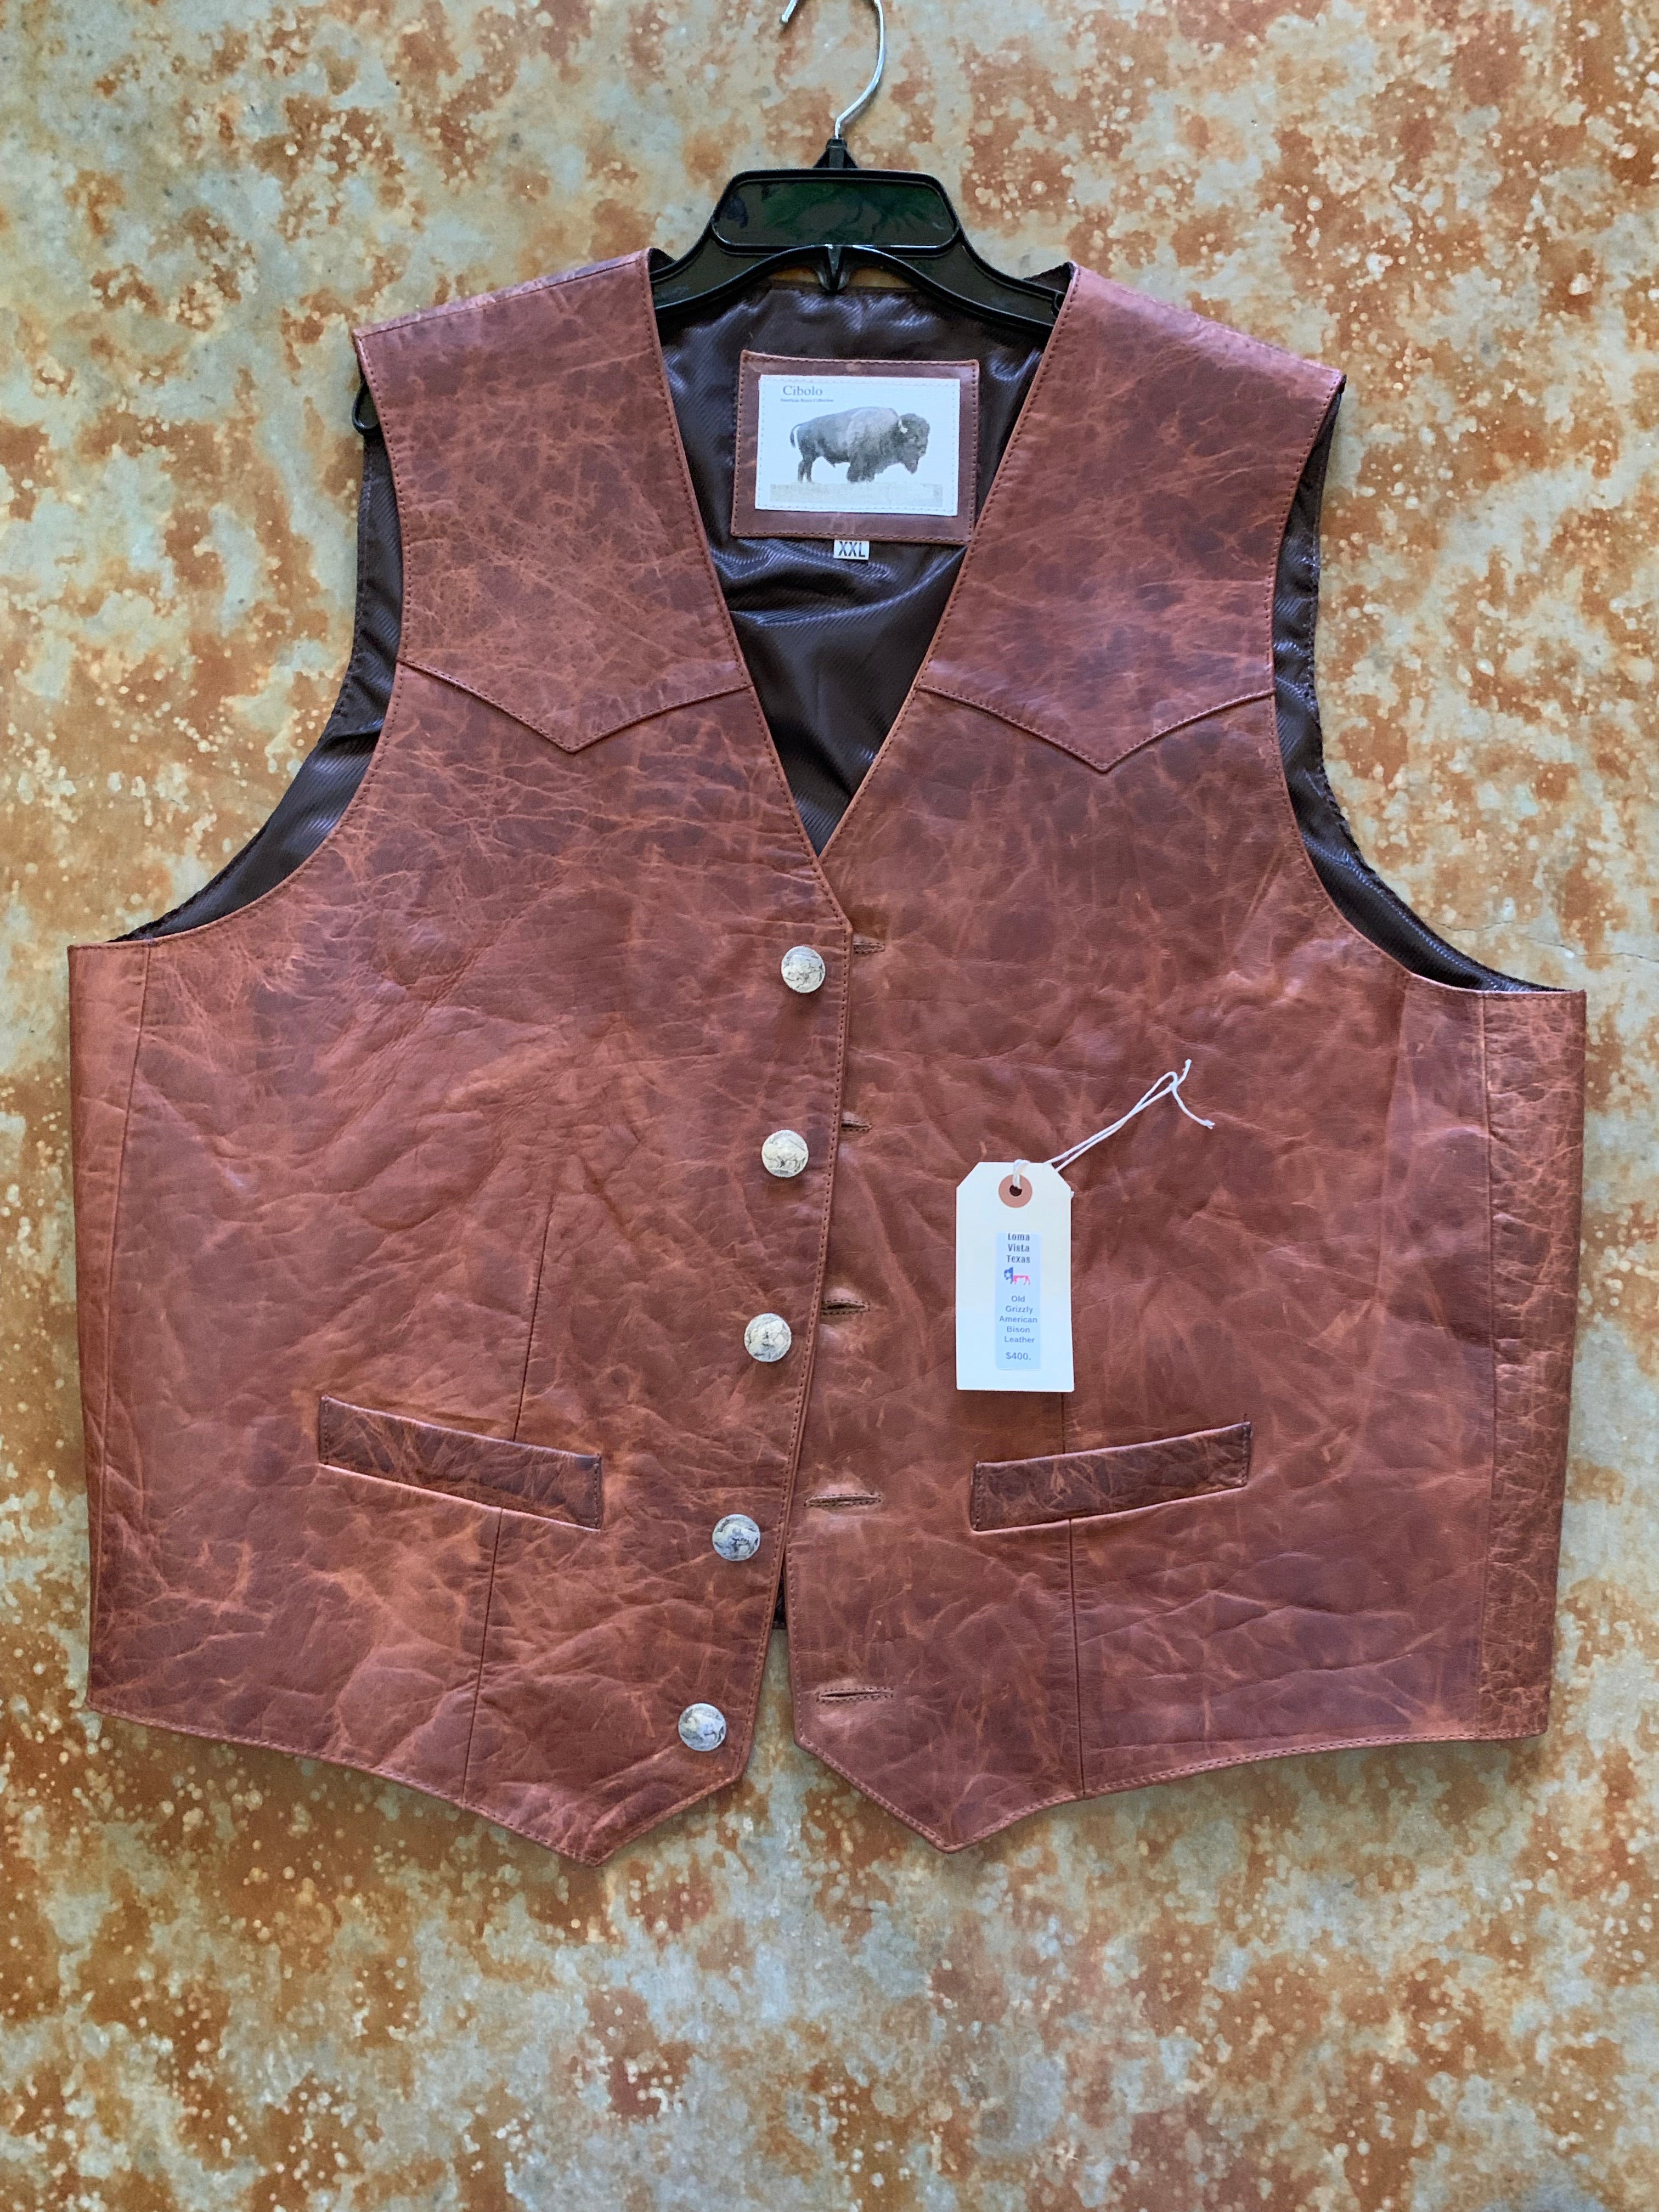 Loma Vista Bison Leather - XXL.  "Old Grizzly" finish